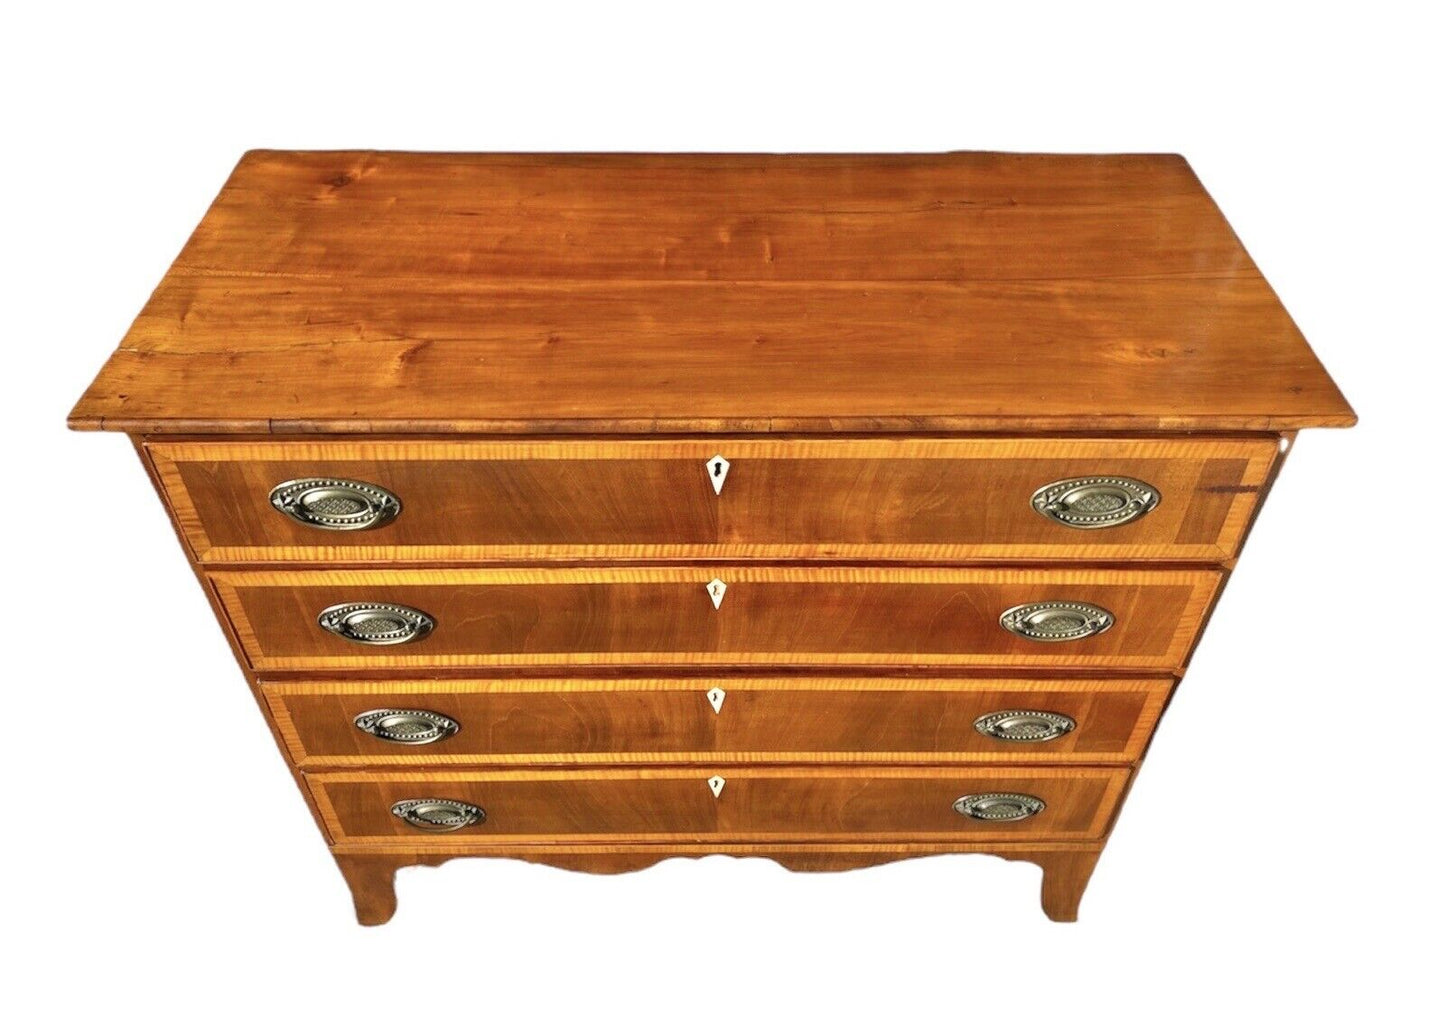 Antique Cherry & Tiger Maple Hepplewhite Chest of Drawers - Spooner & Fitts